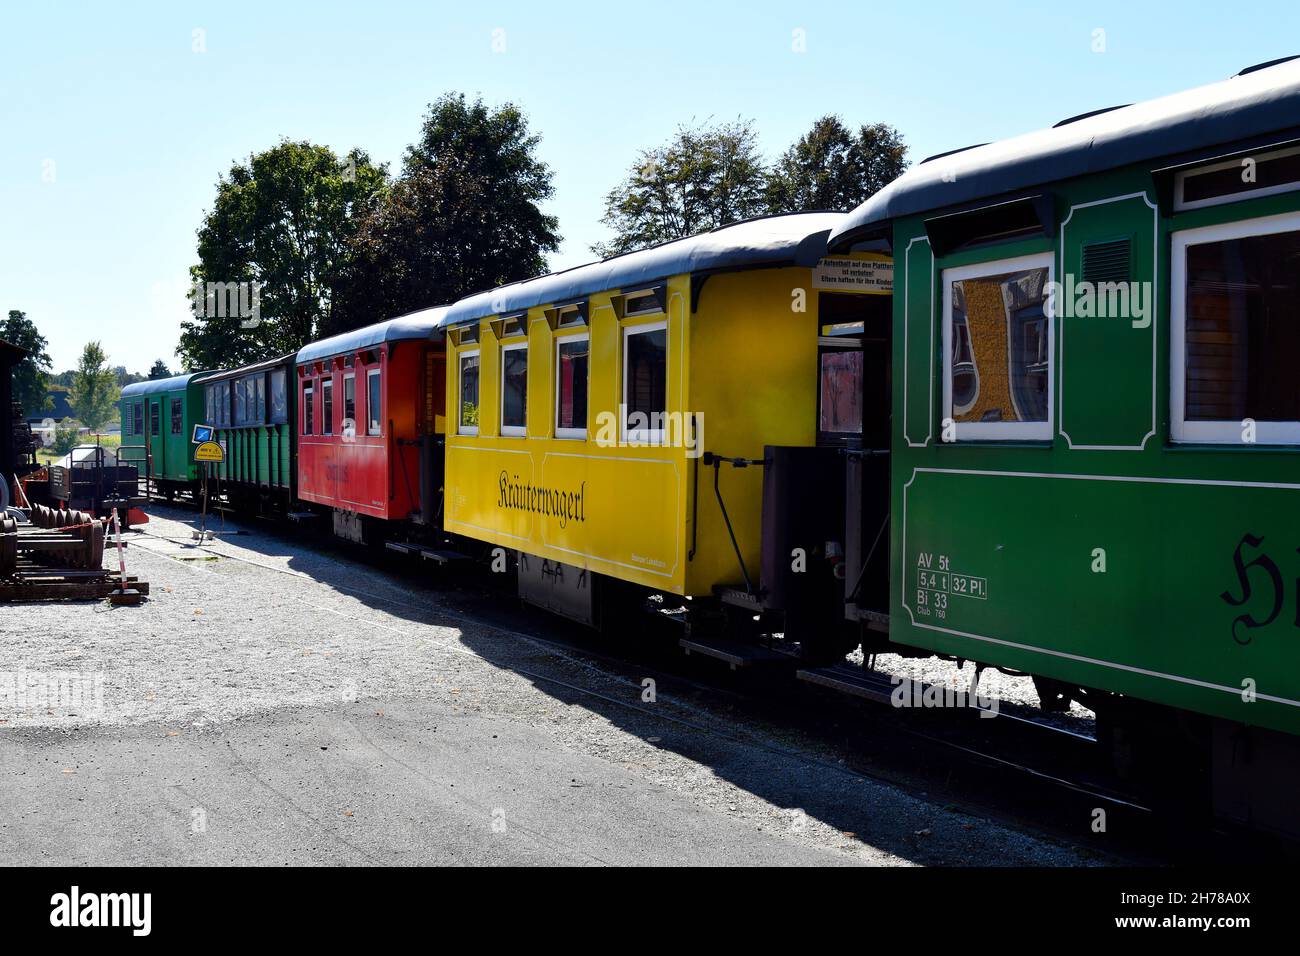 Stainz, Austria - September 23, 2021: Colorful wagons of the so-called Flascherlzug - bottle train - a narrow-gauge railway and a popular tourist attr Stock Photo